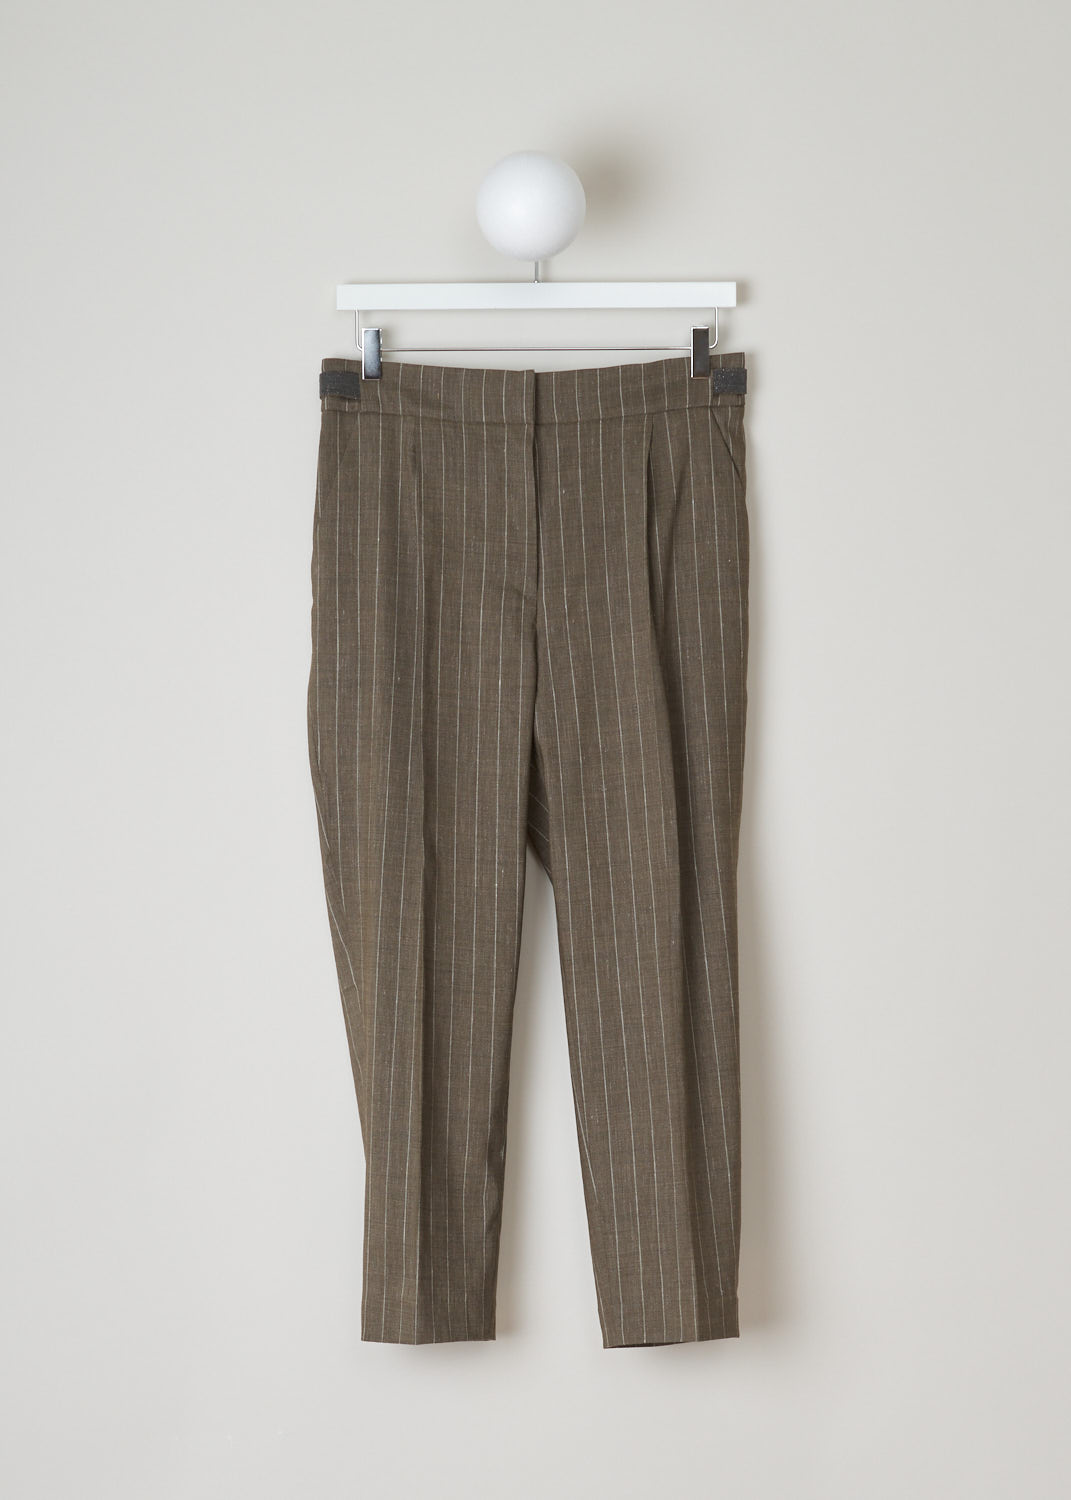 Brunello Cucinelli, Khaki pinstripe pants, MF554P6492_C005, green white, front, Khaki pinstripe pants, comes without belt loops, but with monili fasteners. Made with a single pleat and forward slanted pockets. On the back it has welt pockets. Comes with a cropped length. As fastening option this model has a zipper, an metal clip and a backing button. 